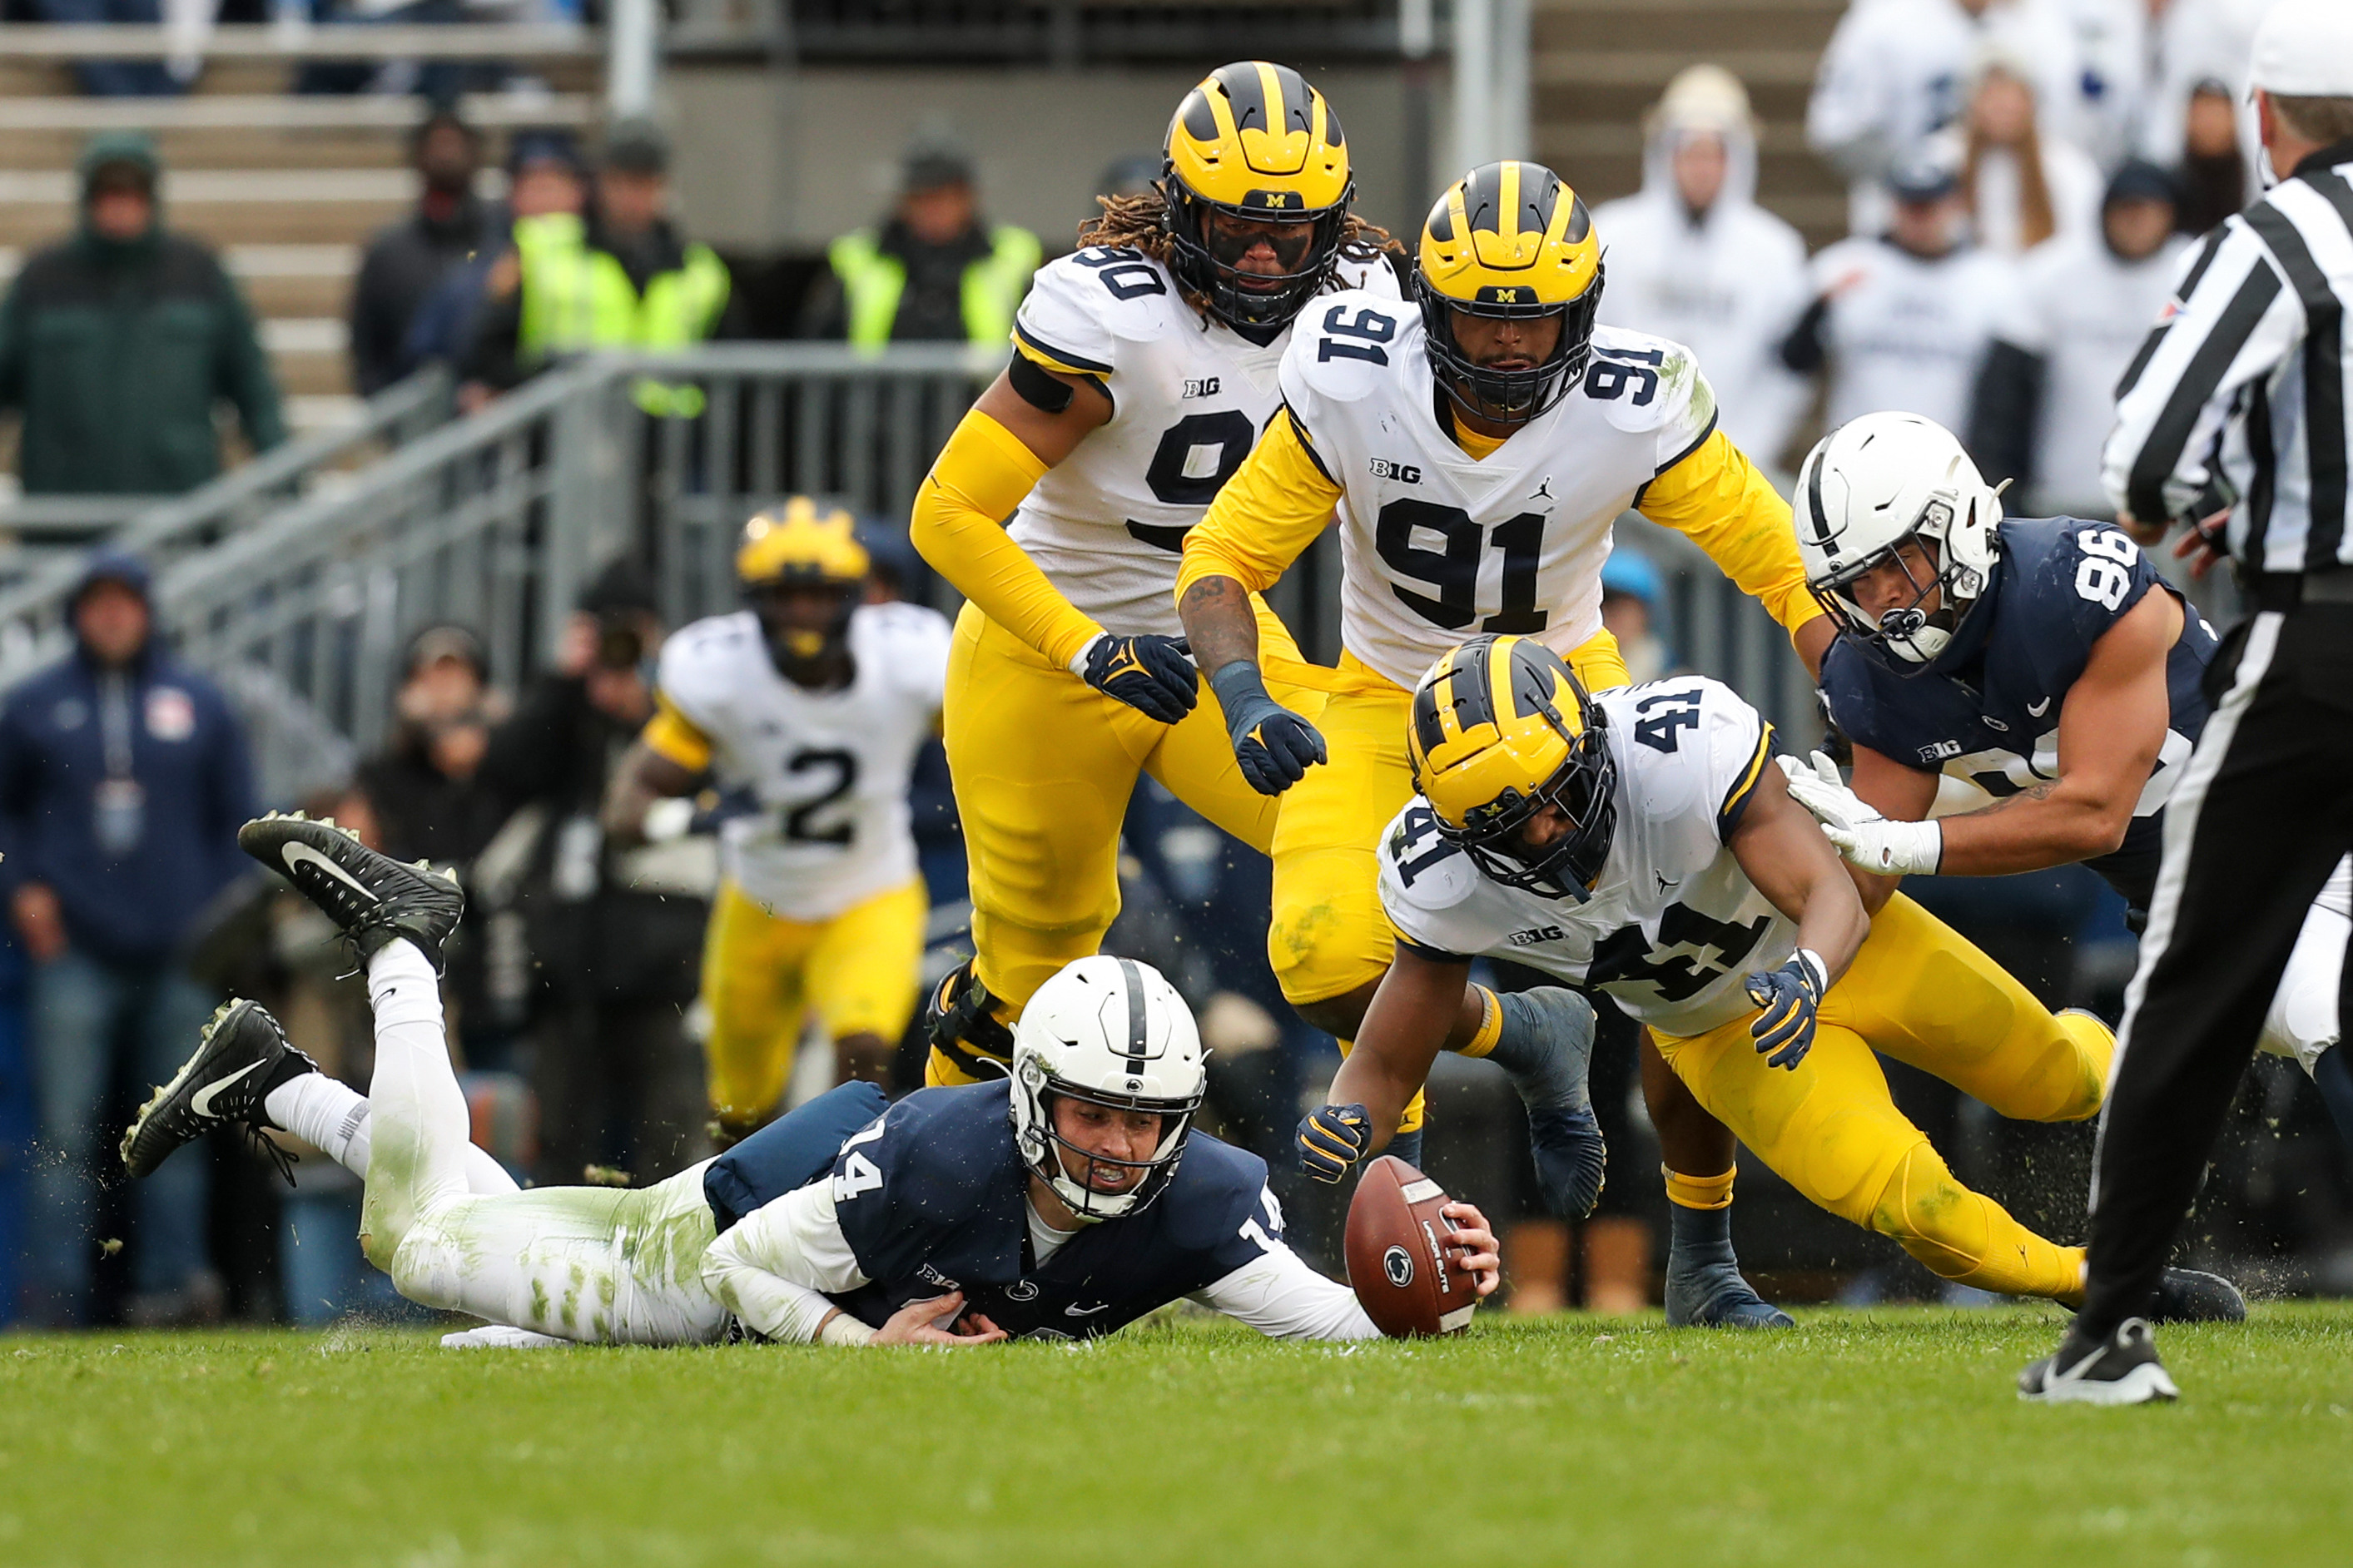 Penn State quarterback Sean Clifford recovers a fumble after being sacked in the first half against Michigan. (Matthew O'Haren/USA Today Sports)